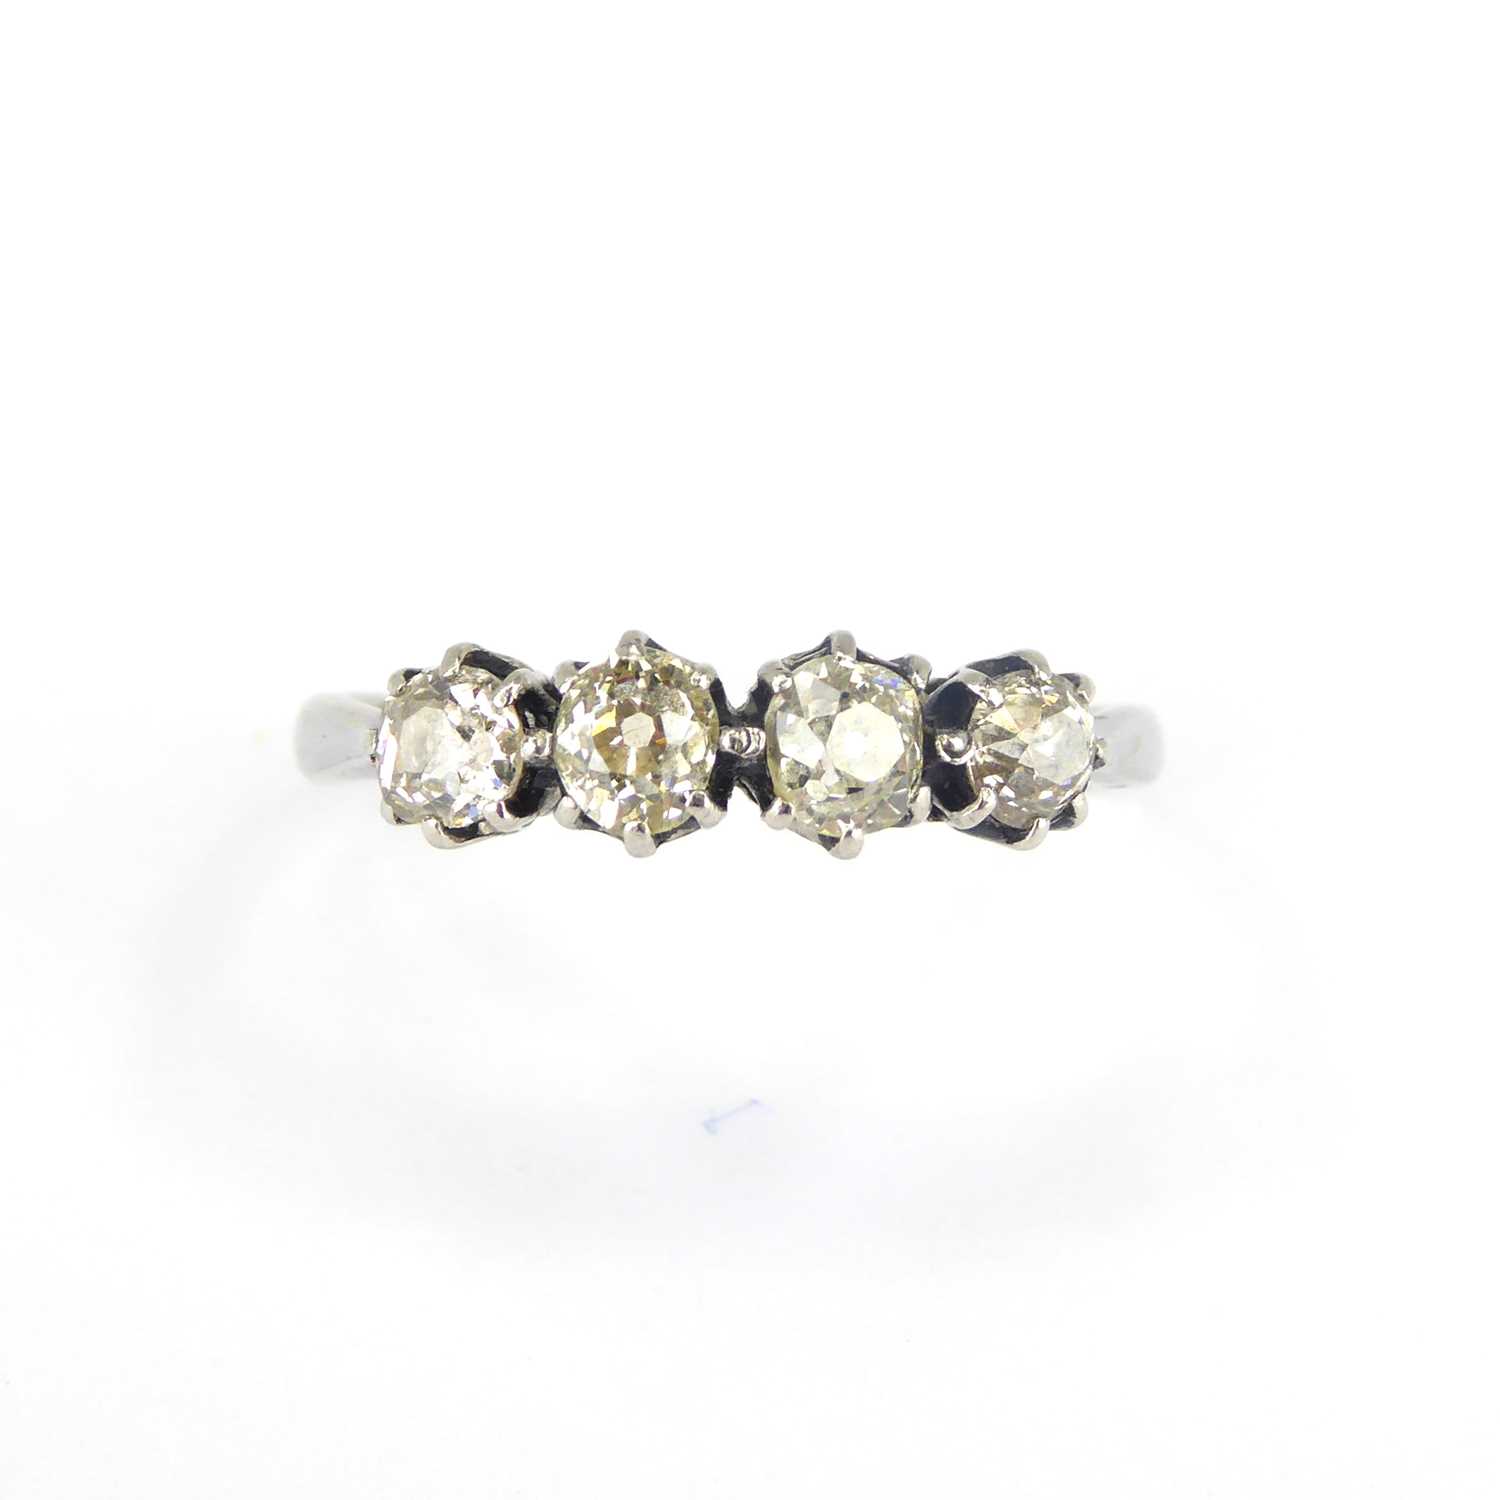 An 18ct white gold ring, the head set with four claw set rose cut diamonds with a slight tinge of